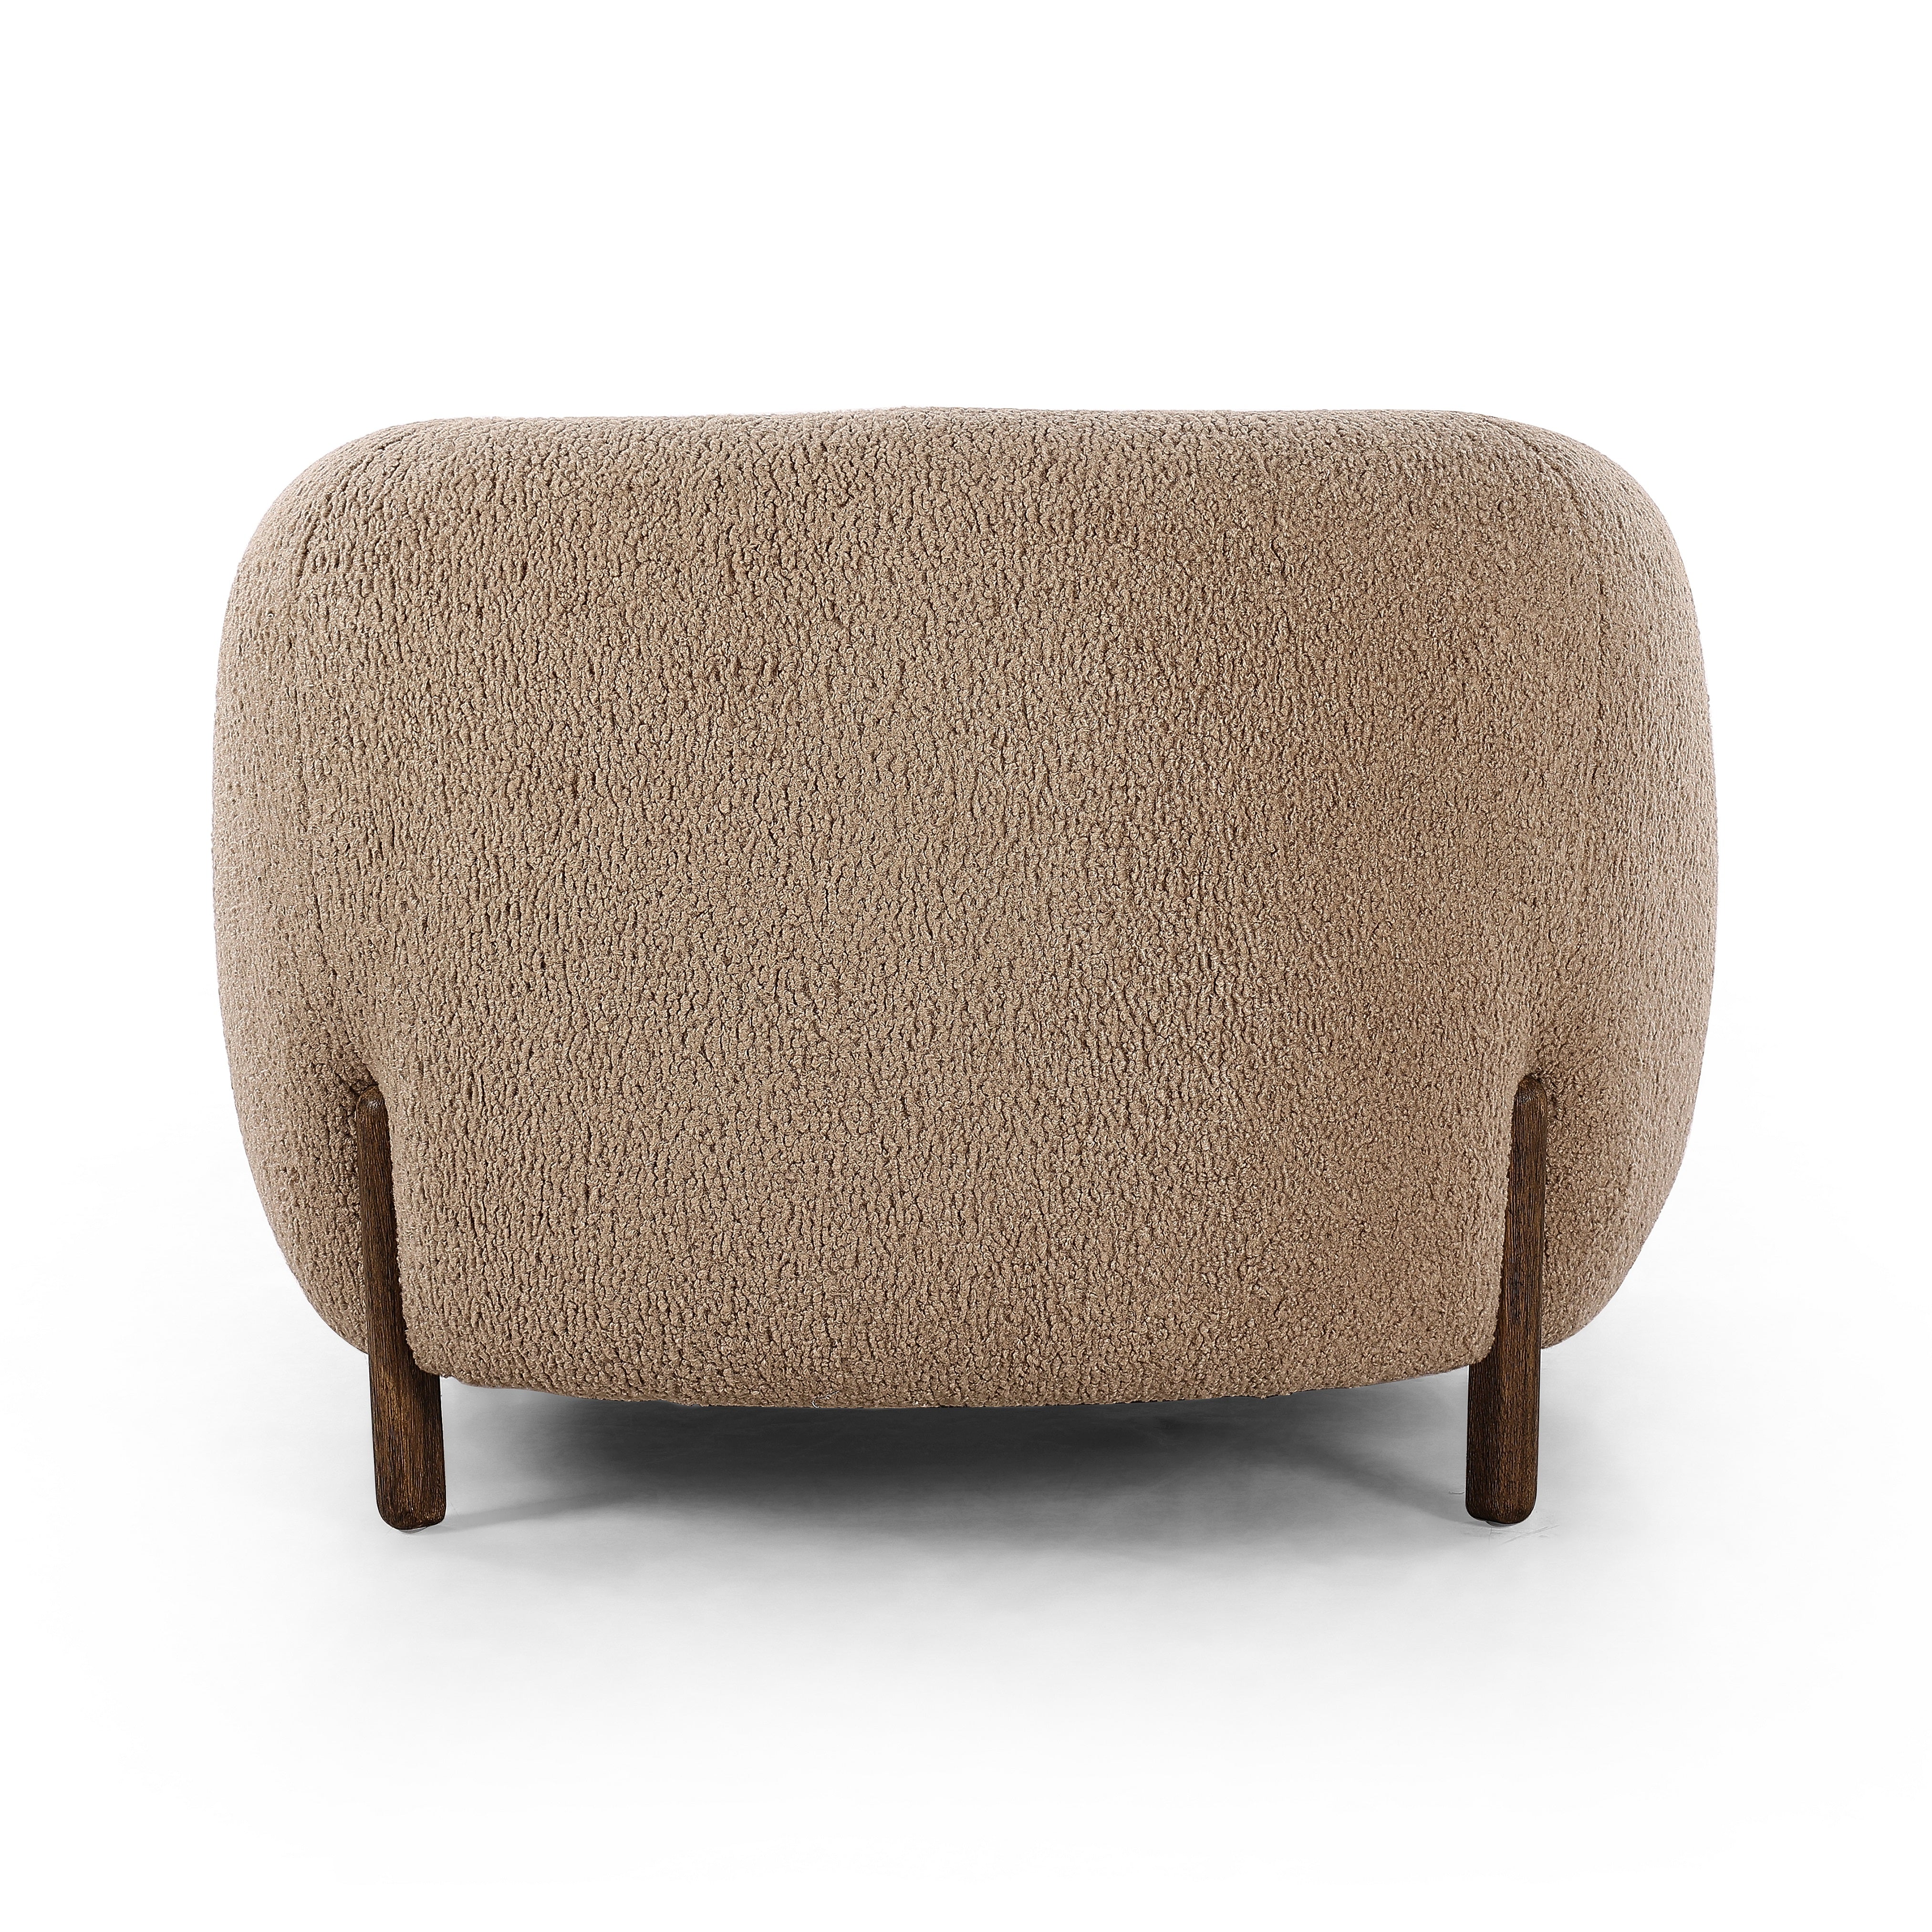 Lyla Sheepskin Camel Chair is a fresh take on the traditional tub chair, with exaggerated depth for drama and comfort. Solid wood legs intersect sheepskin upholstery for clean contrast and scale. Amethyst Home provides interior design services, furniture, rugs, and lighting in the Kansas City metro area.